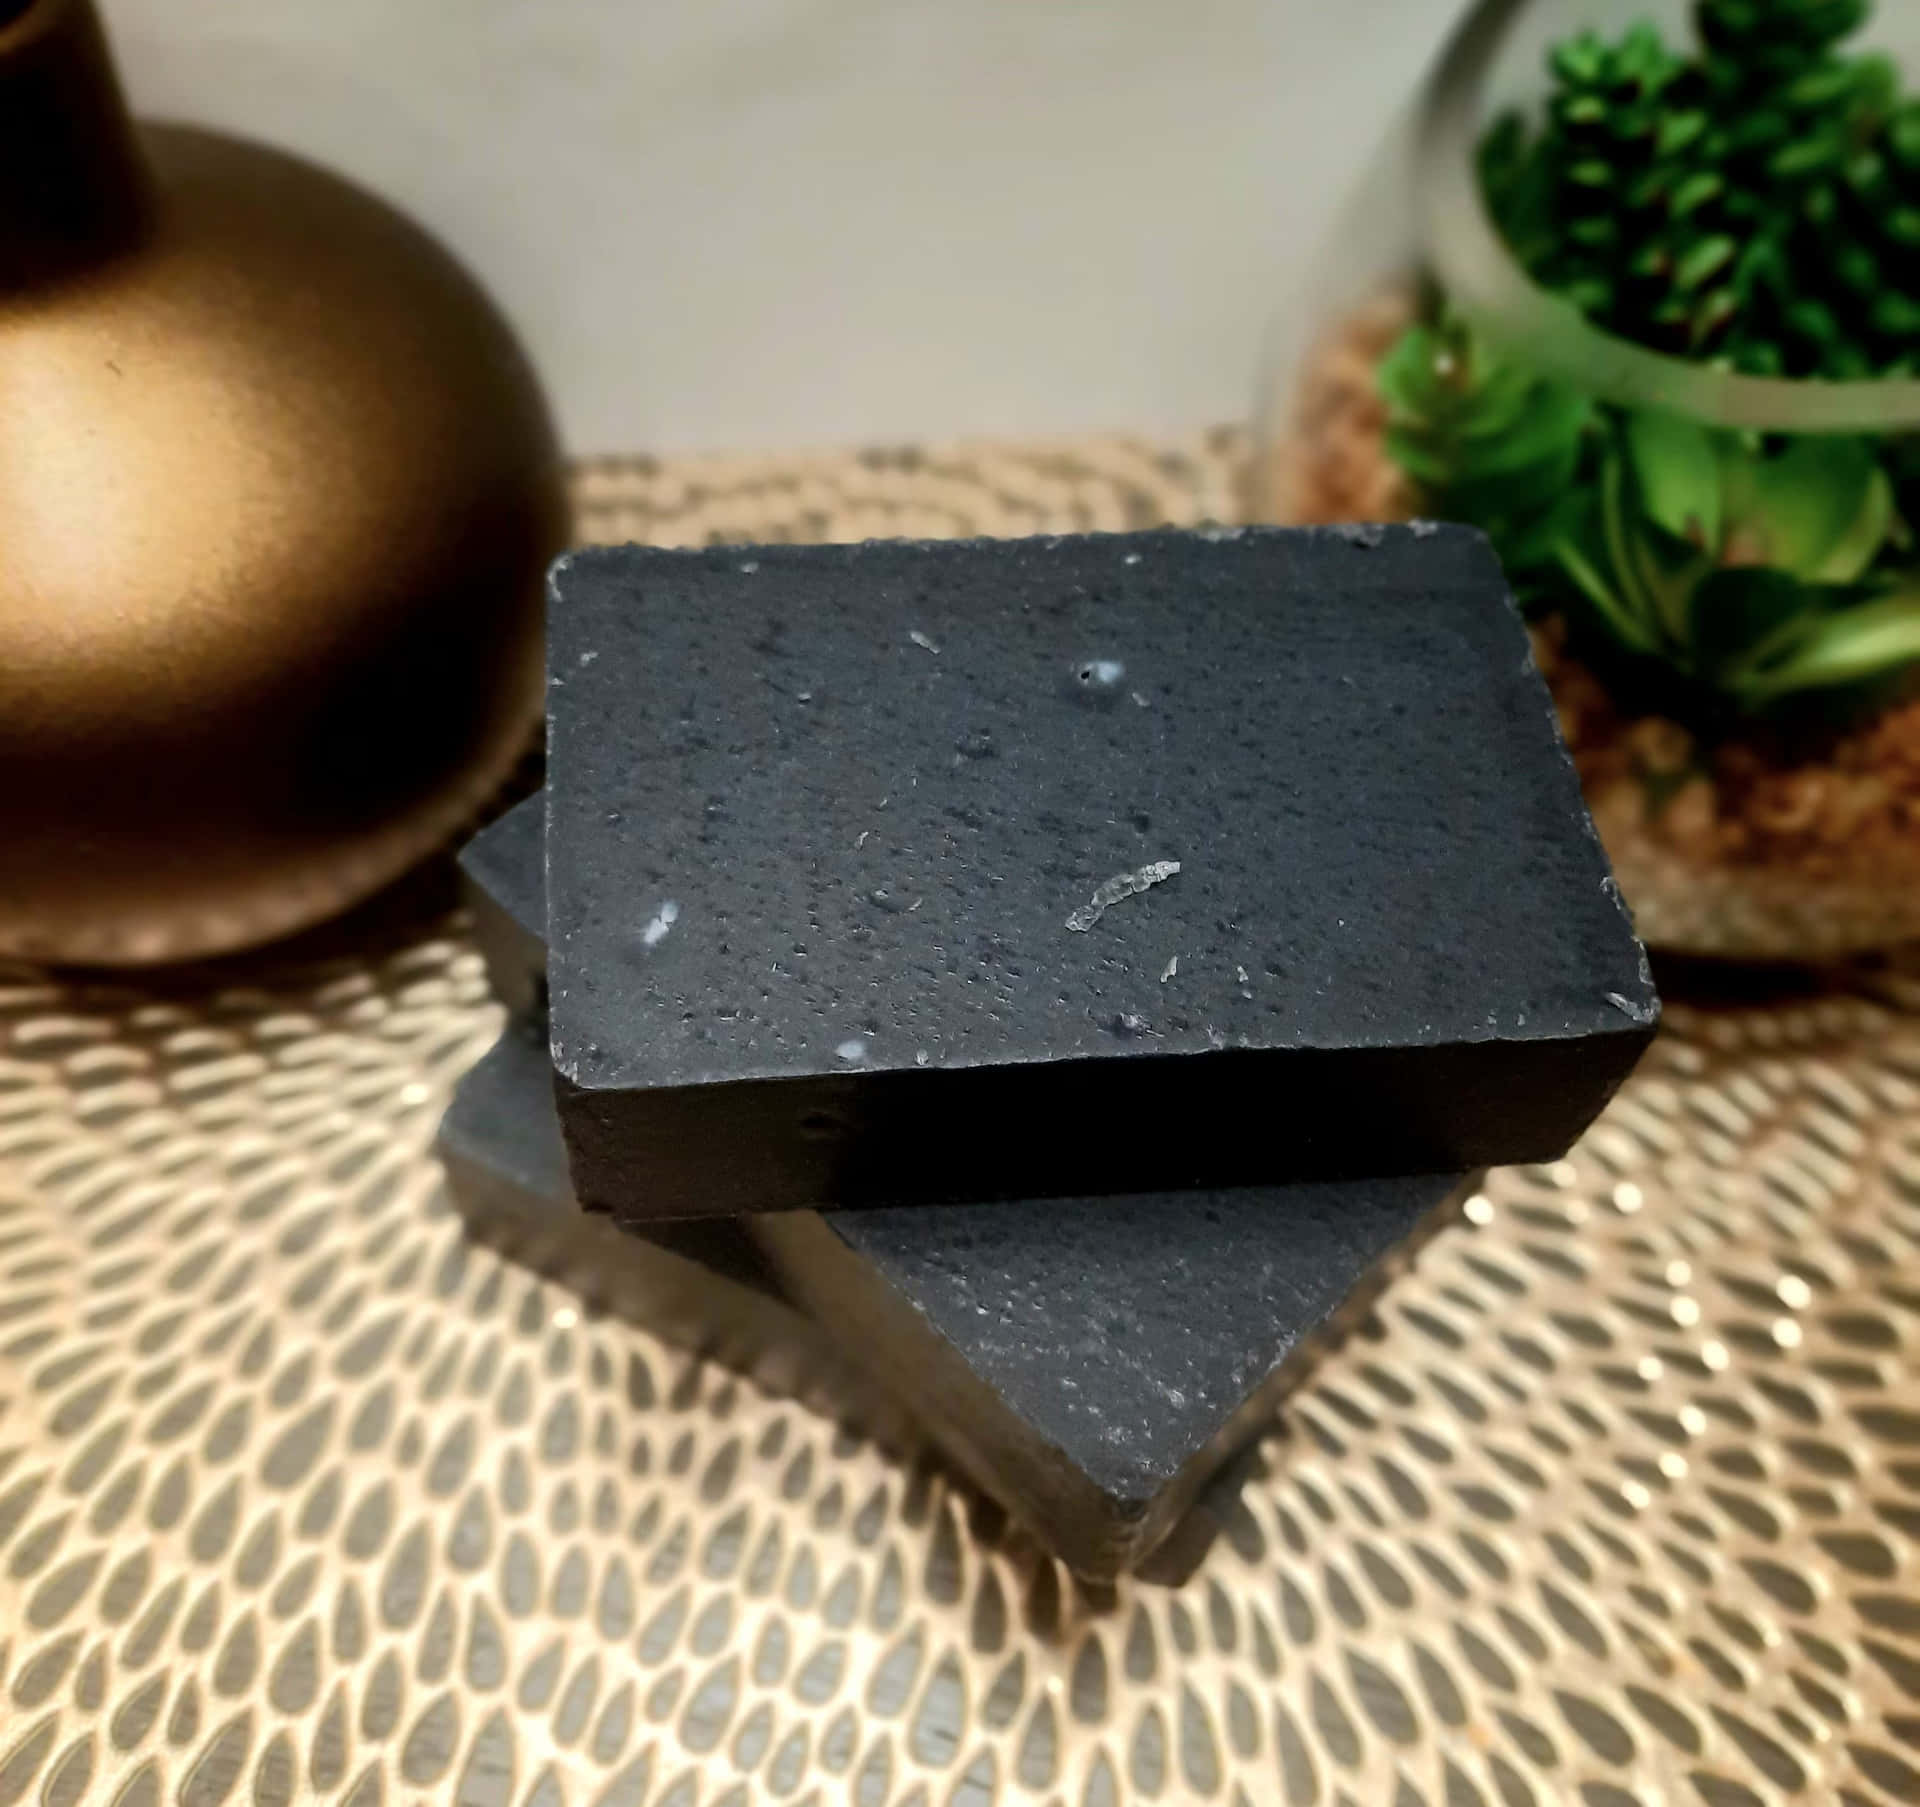 Nourish and rejuvenate your skin with natural African black soap. Wallpaper